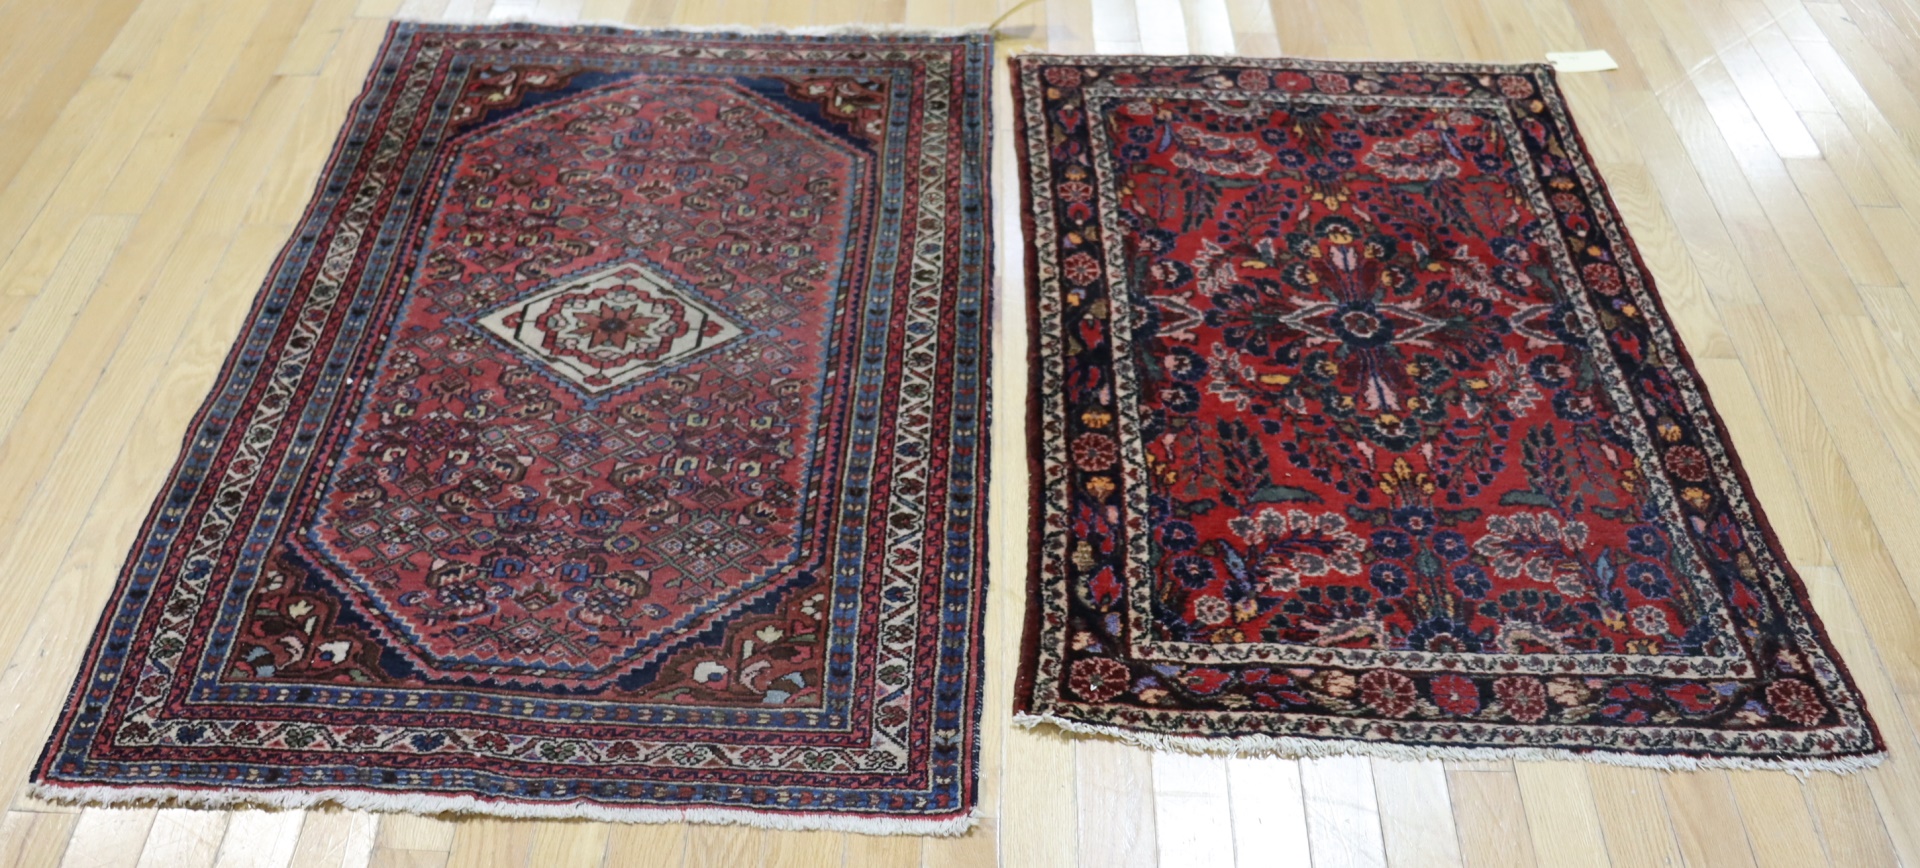 2 VINTAGE AND FINELY HAND WOVEN 3b7bb7